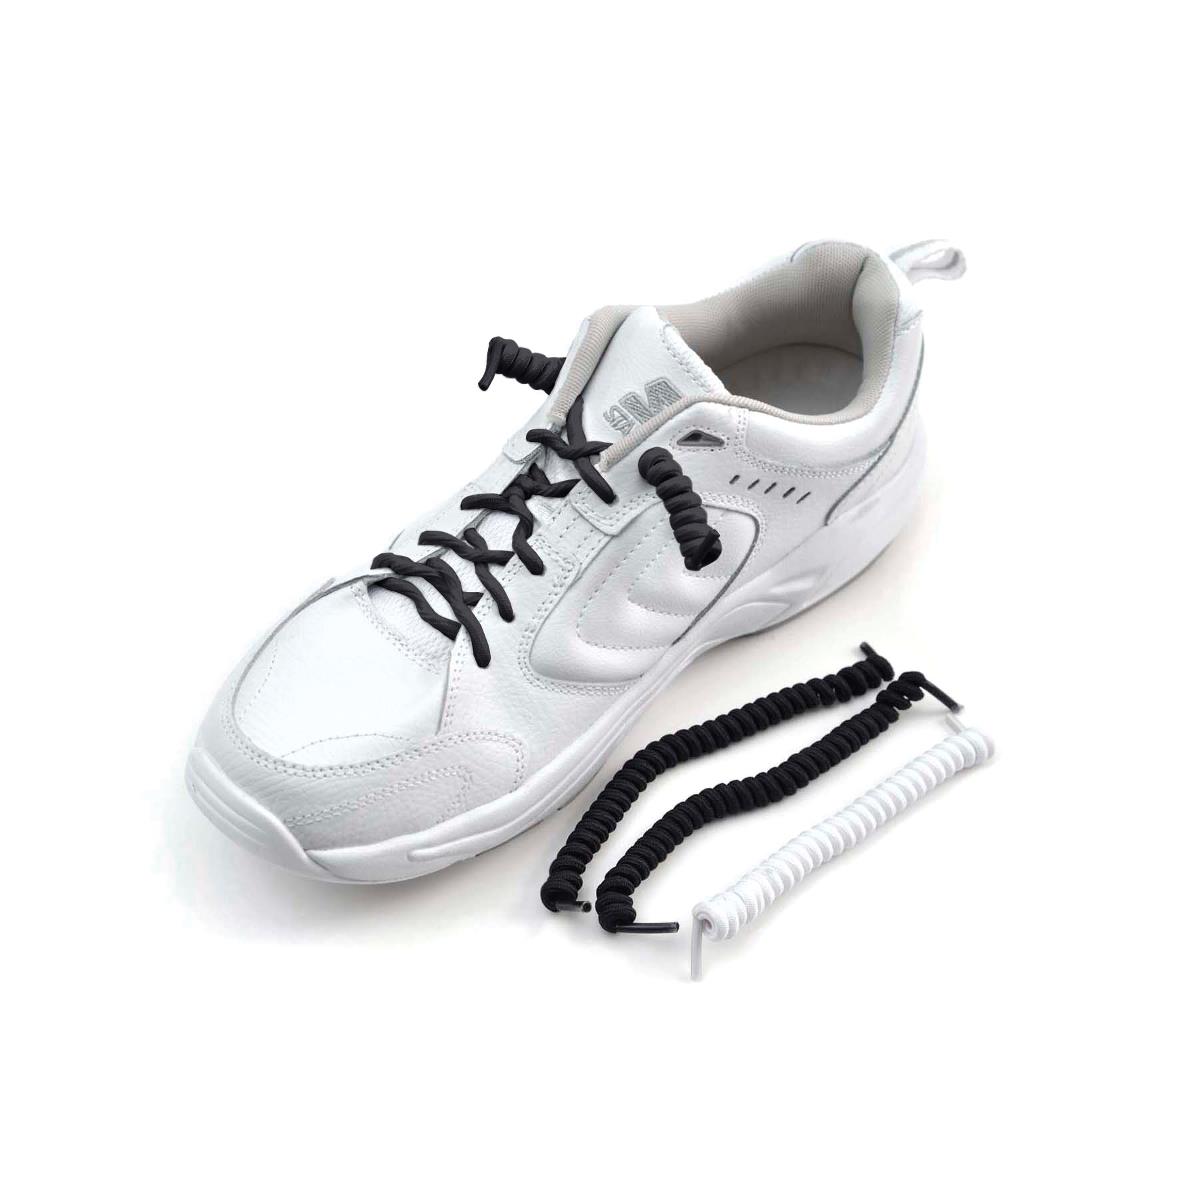 No-Tie One-Hand Adjustable Stretch Shoe Laces